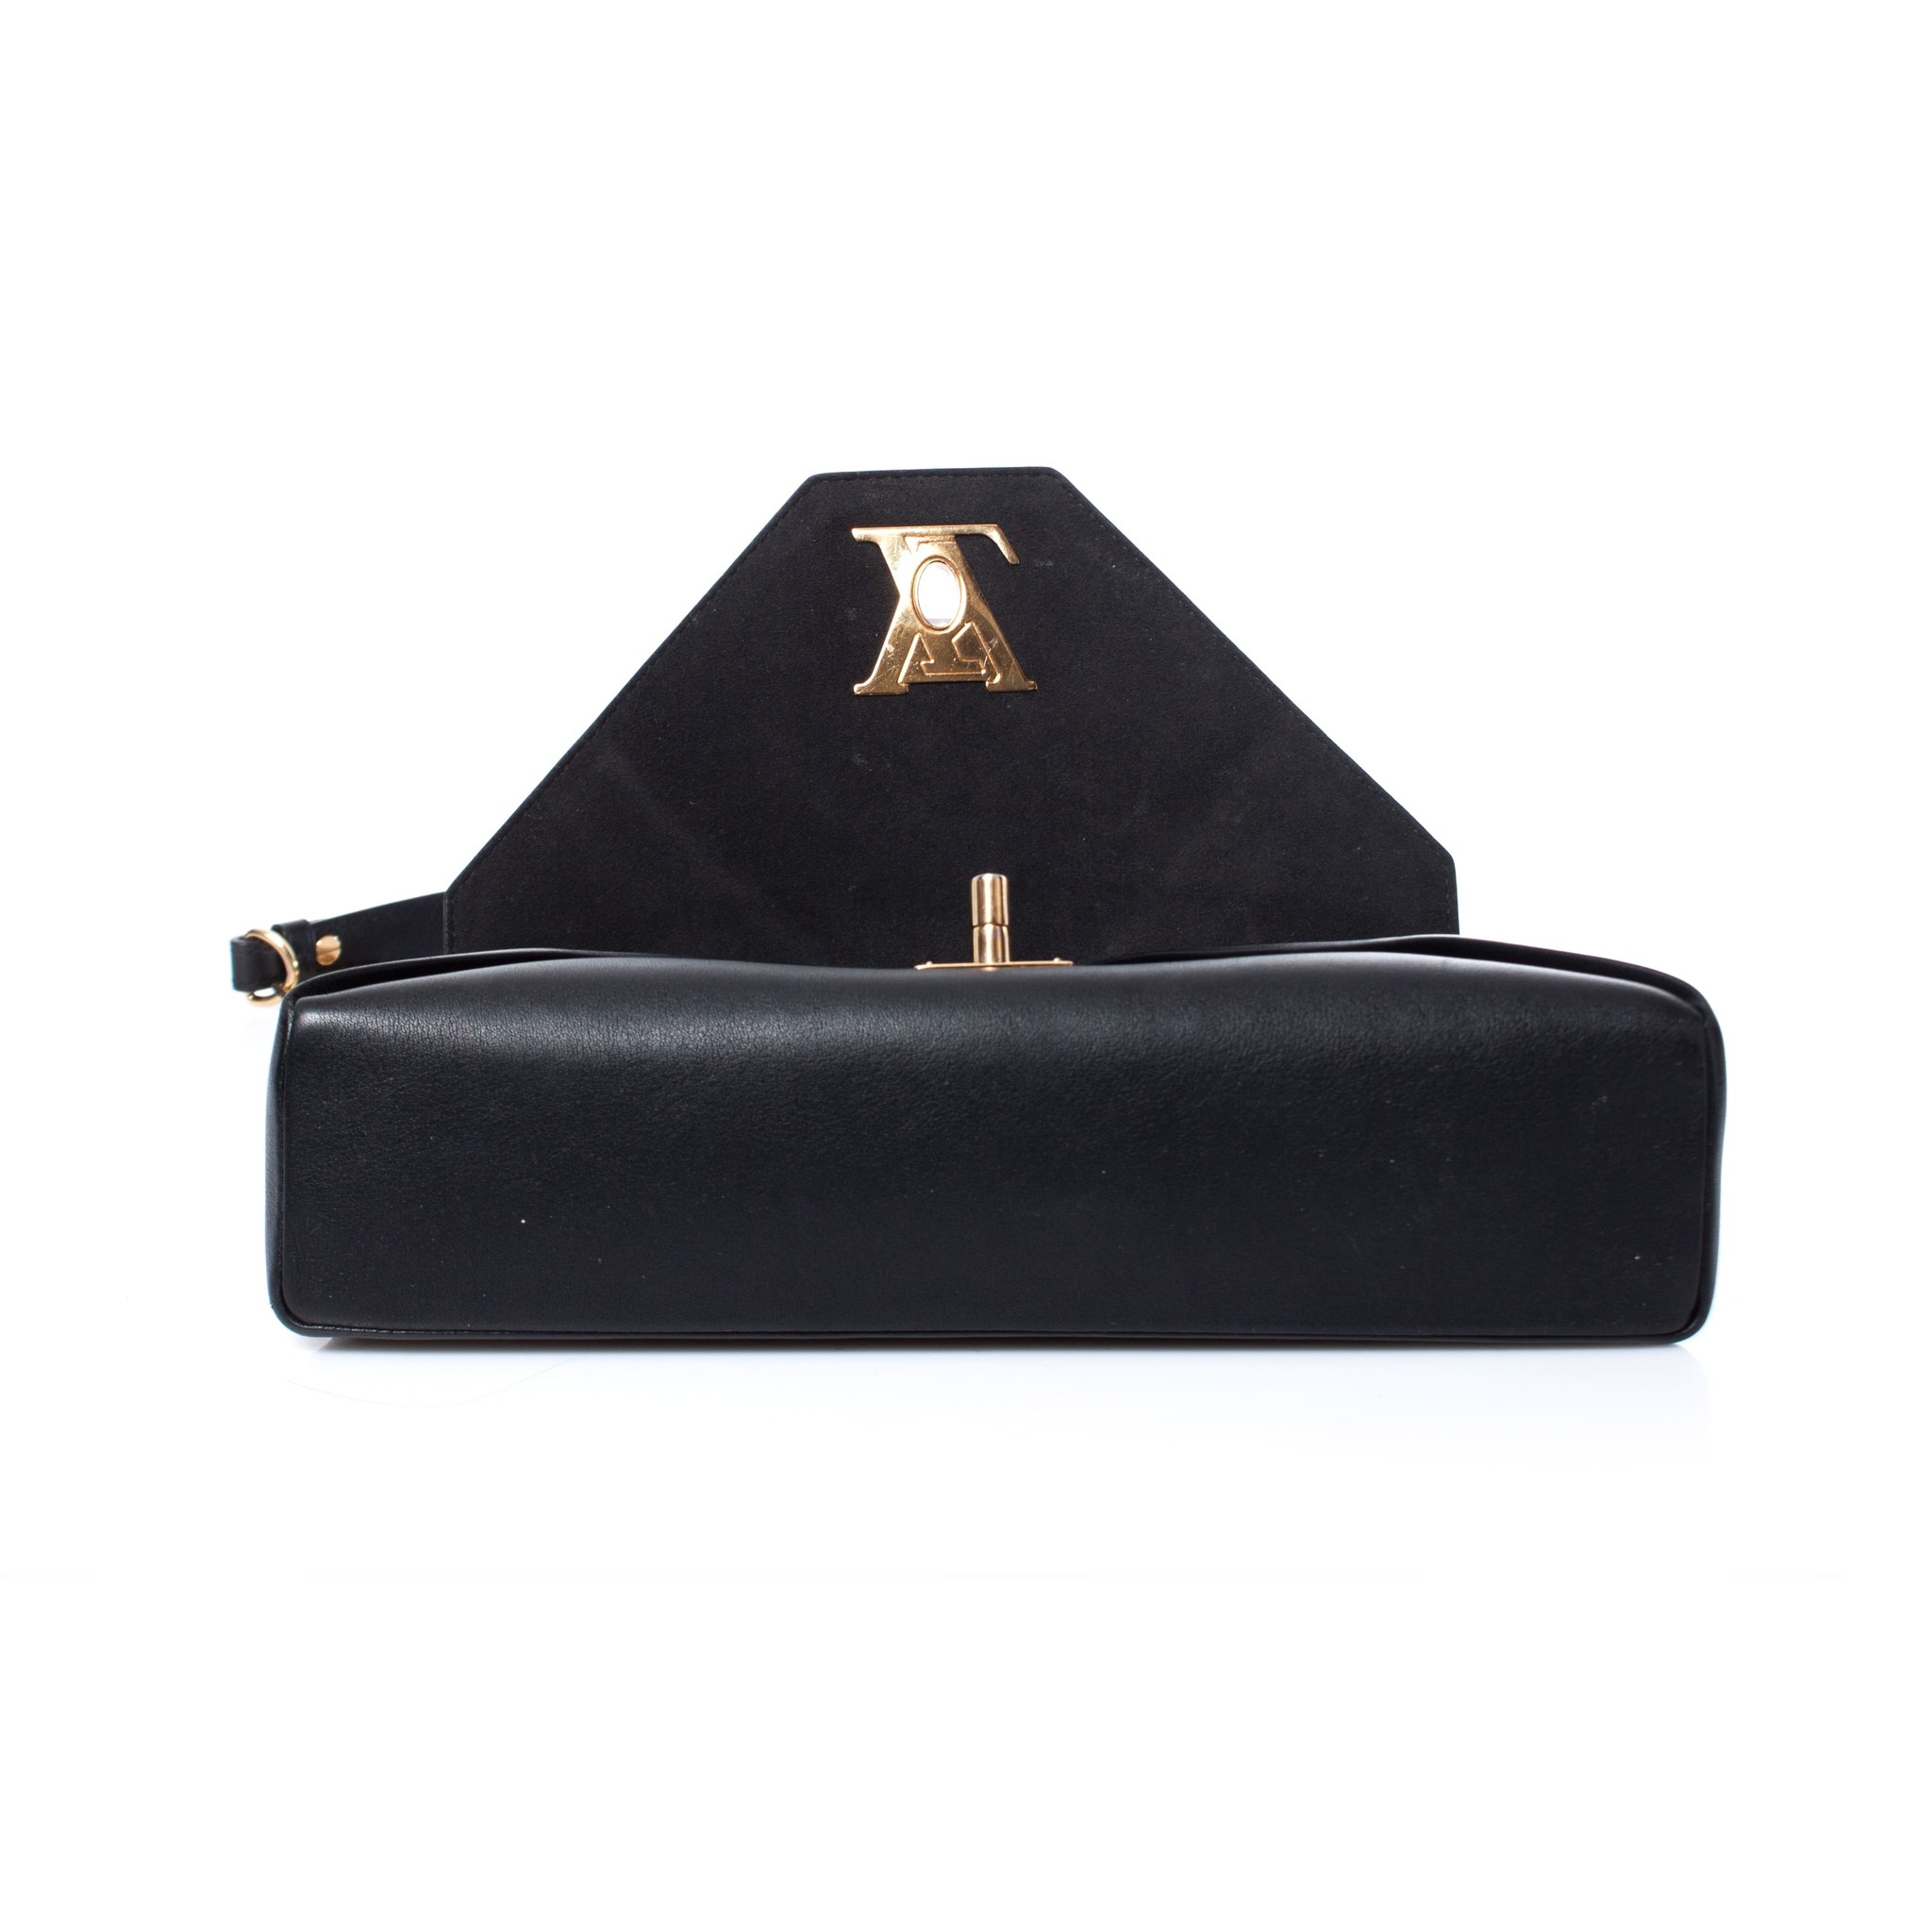 Louis Vuitton, Love note. Crafted in black leather with gold-toned LV  turn-lock closure and chain link. Turn lock closure opens to a black suede  interior with s…